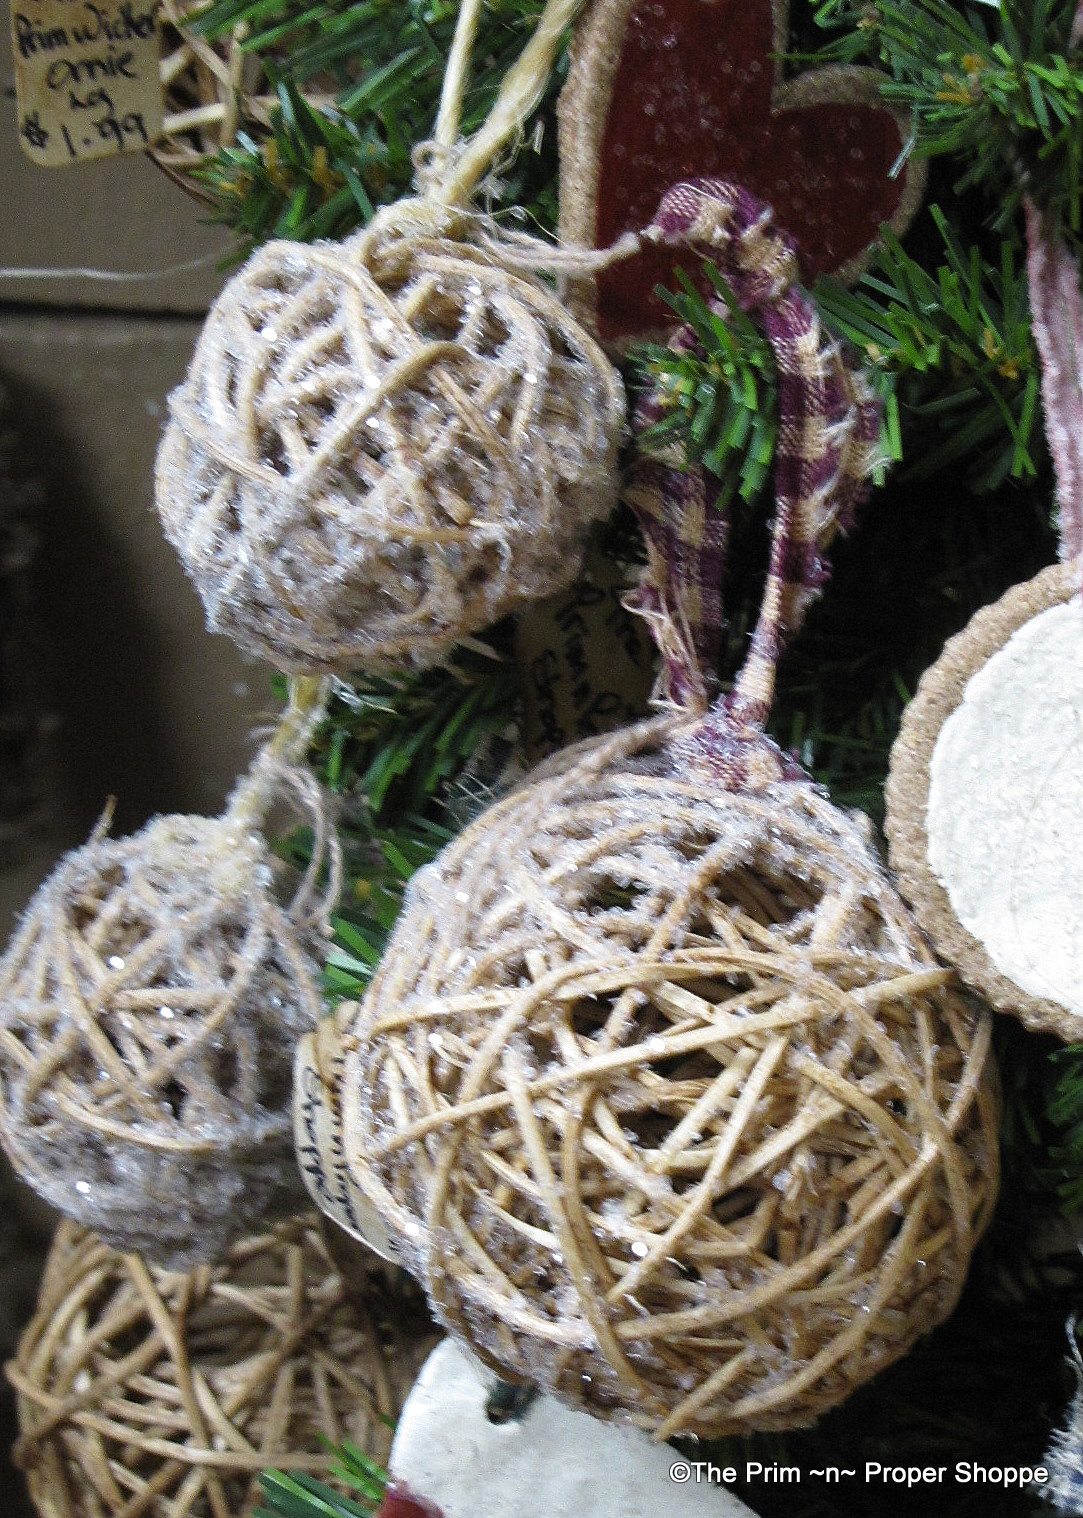 The Prim `n` Proper Shoppe: Frosted -Dollar Tree- Rattan Christmas Ornies